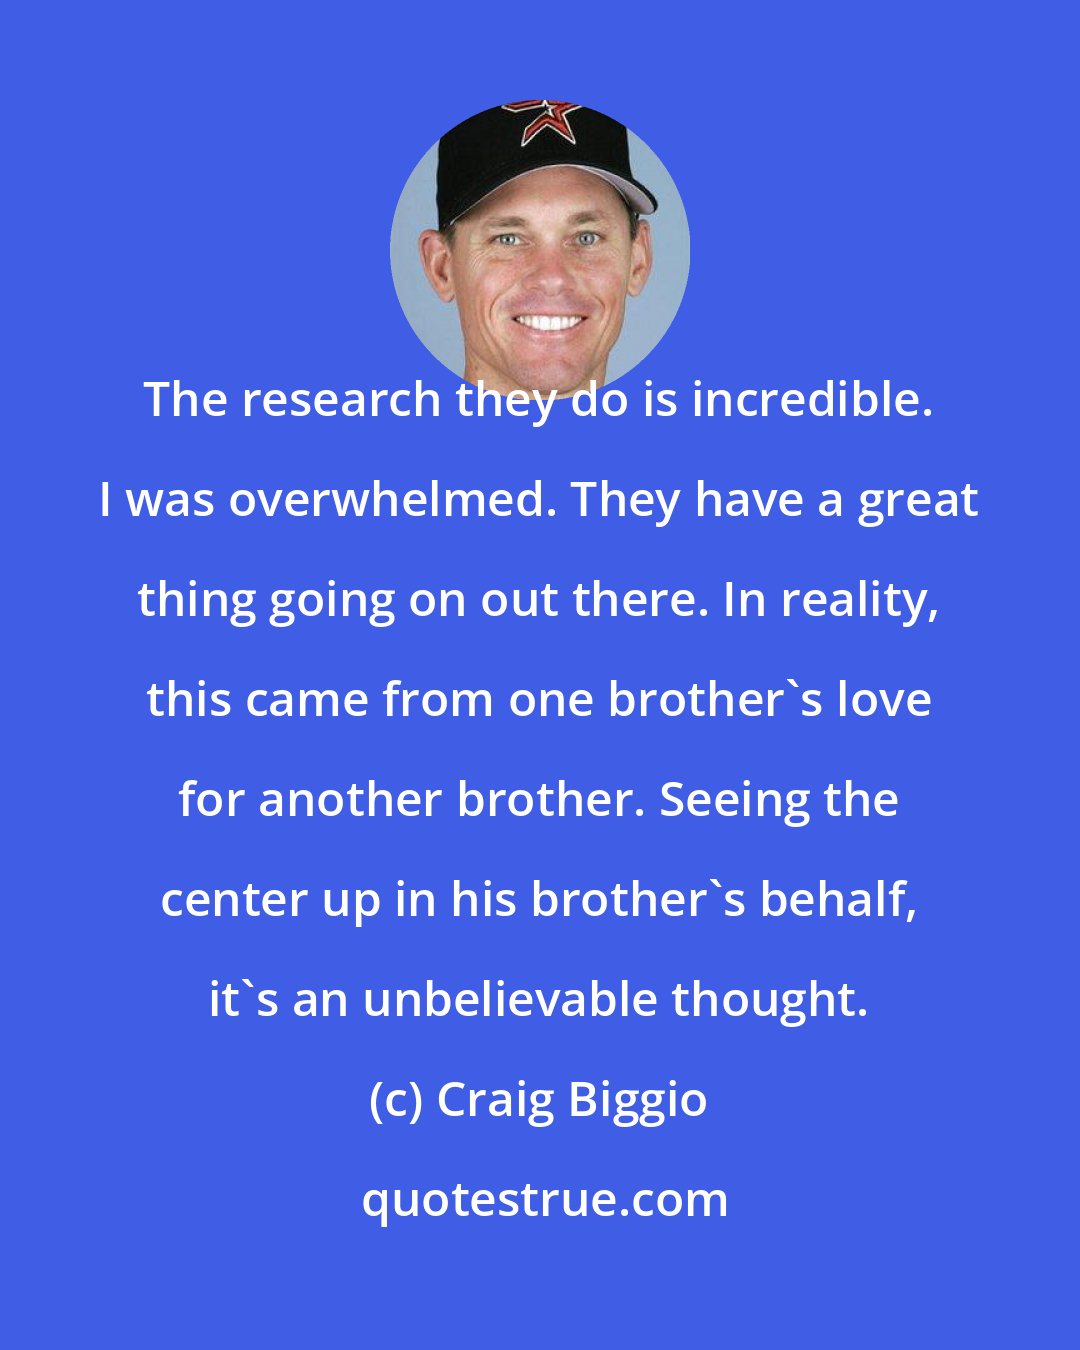 Craig Biggio: The research they do is incredible. I was overwhelmed. They have a great thing going on out there. In reality, this came from one brother's love for another brother. Seeing the center up in his brother's behalf, it's an unbelievable thought.